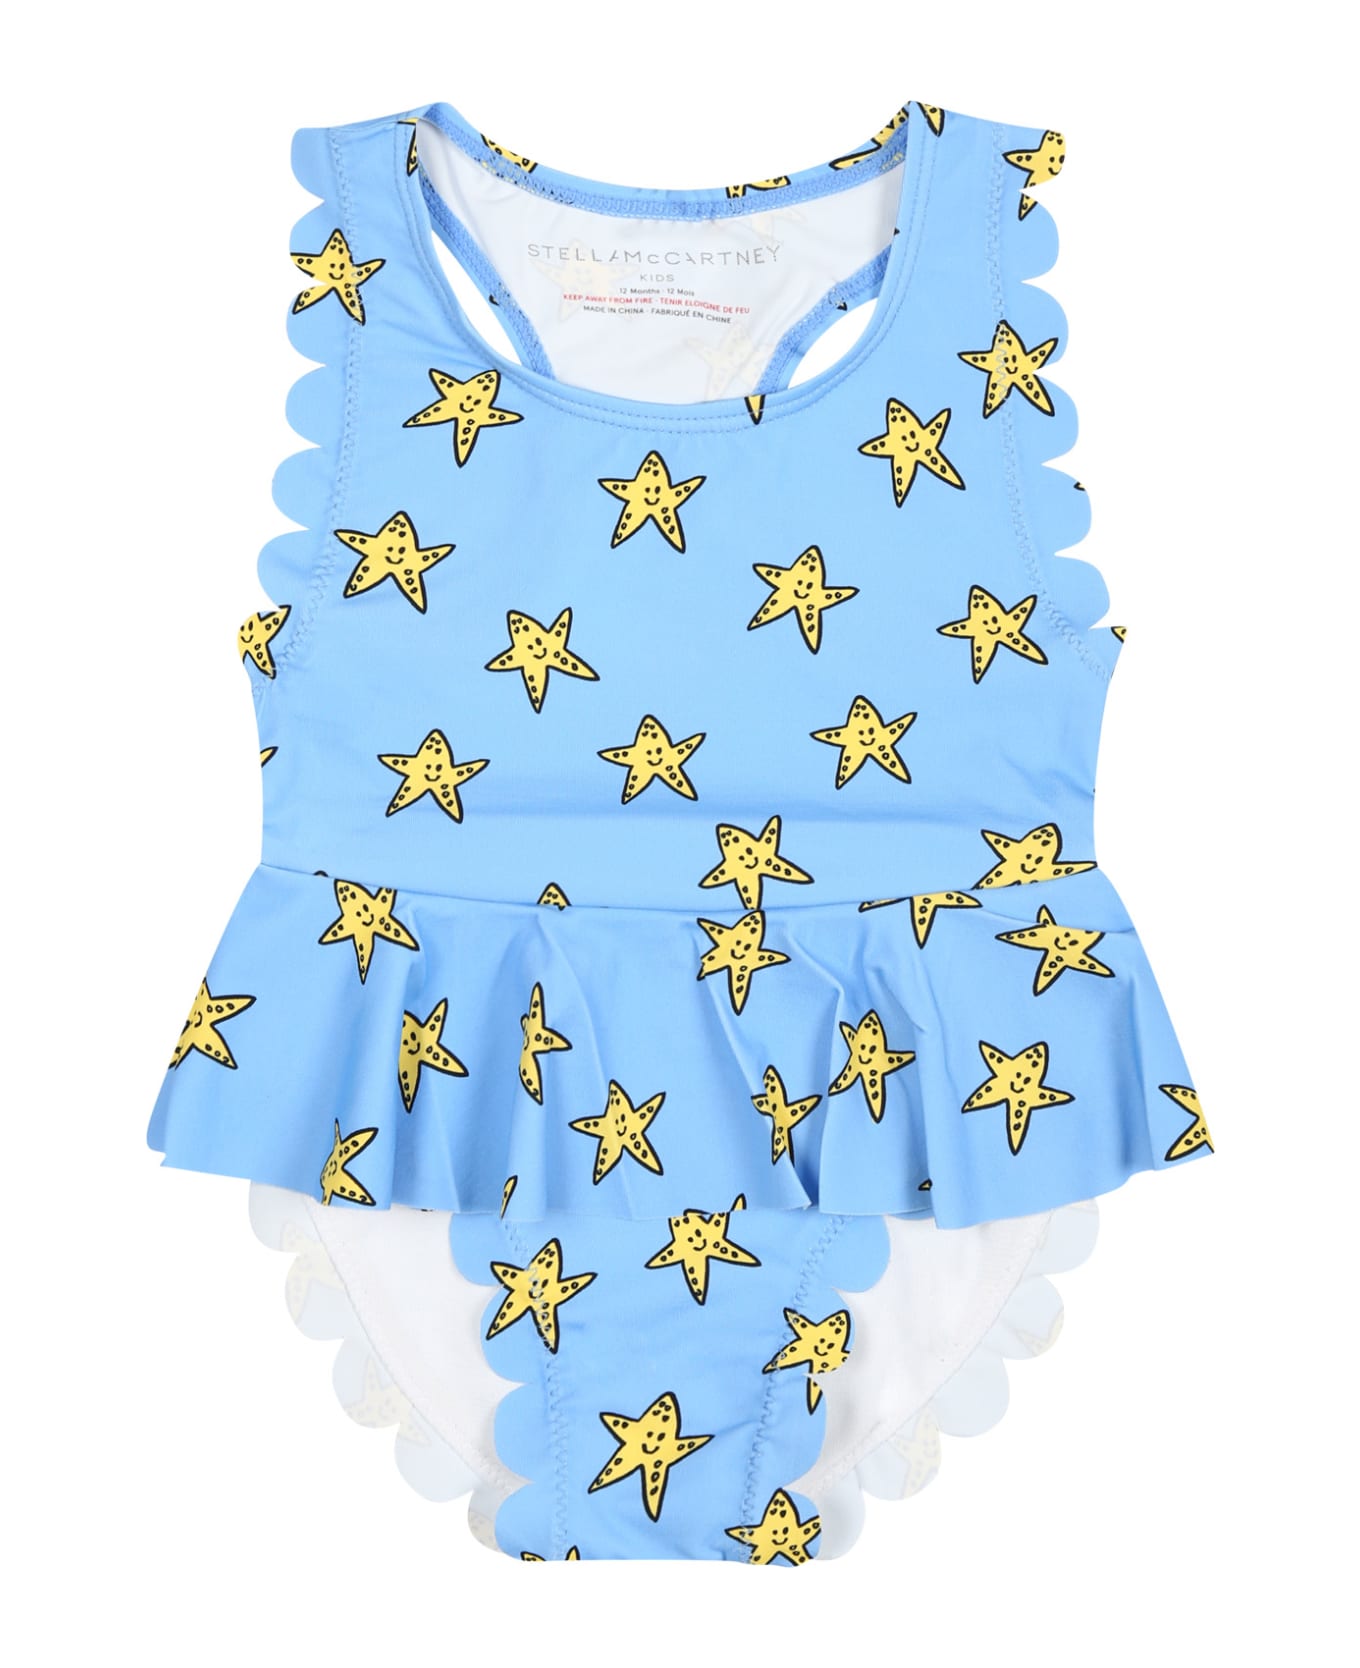 Stella McCartney Kids Light Blue Swimsuit For Baby Girl With Starfishes - Light Blue 水着